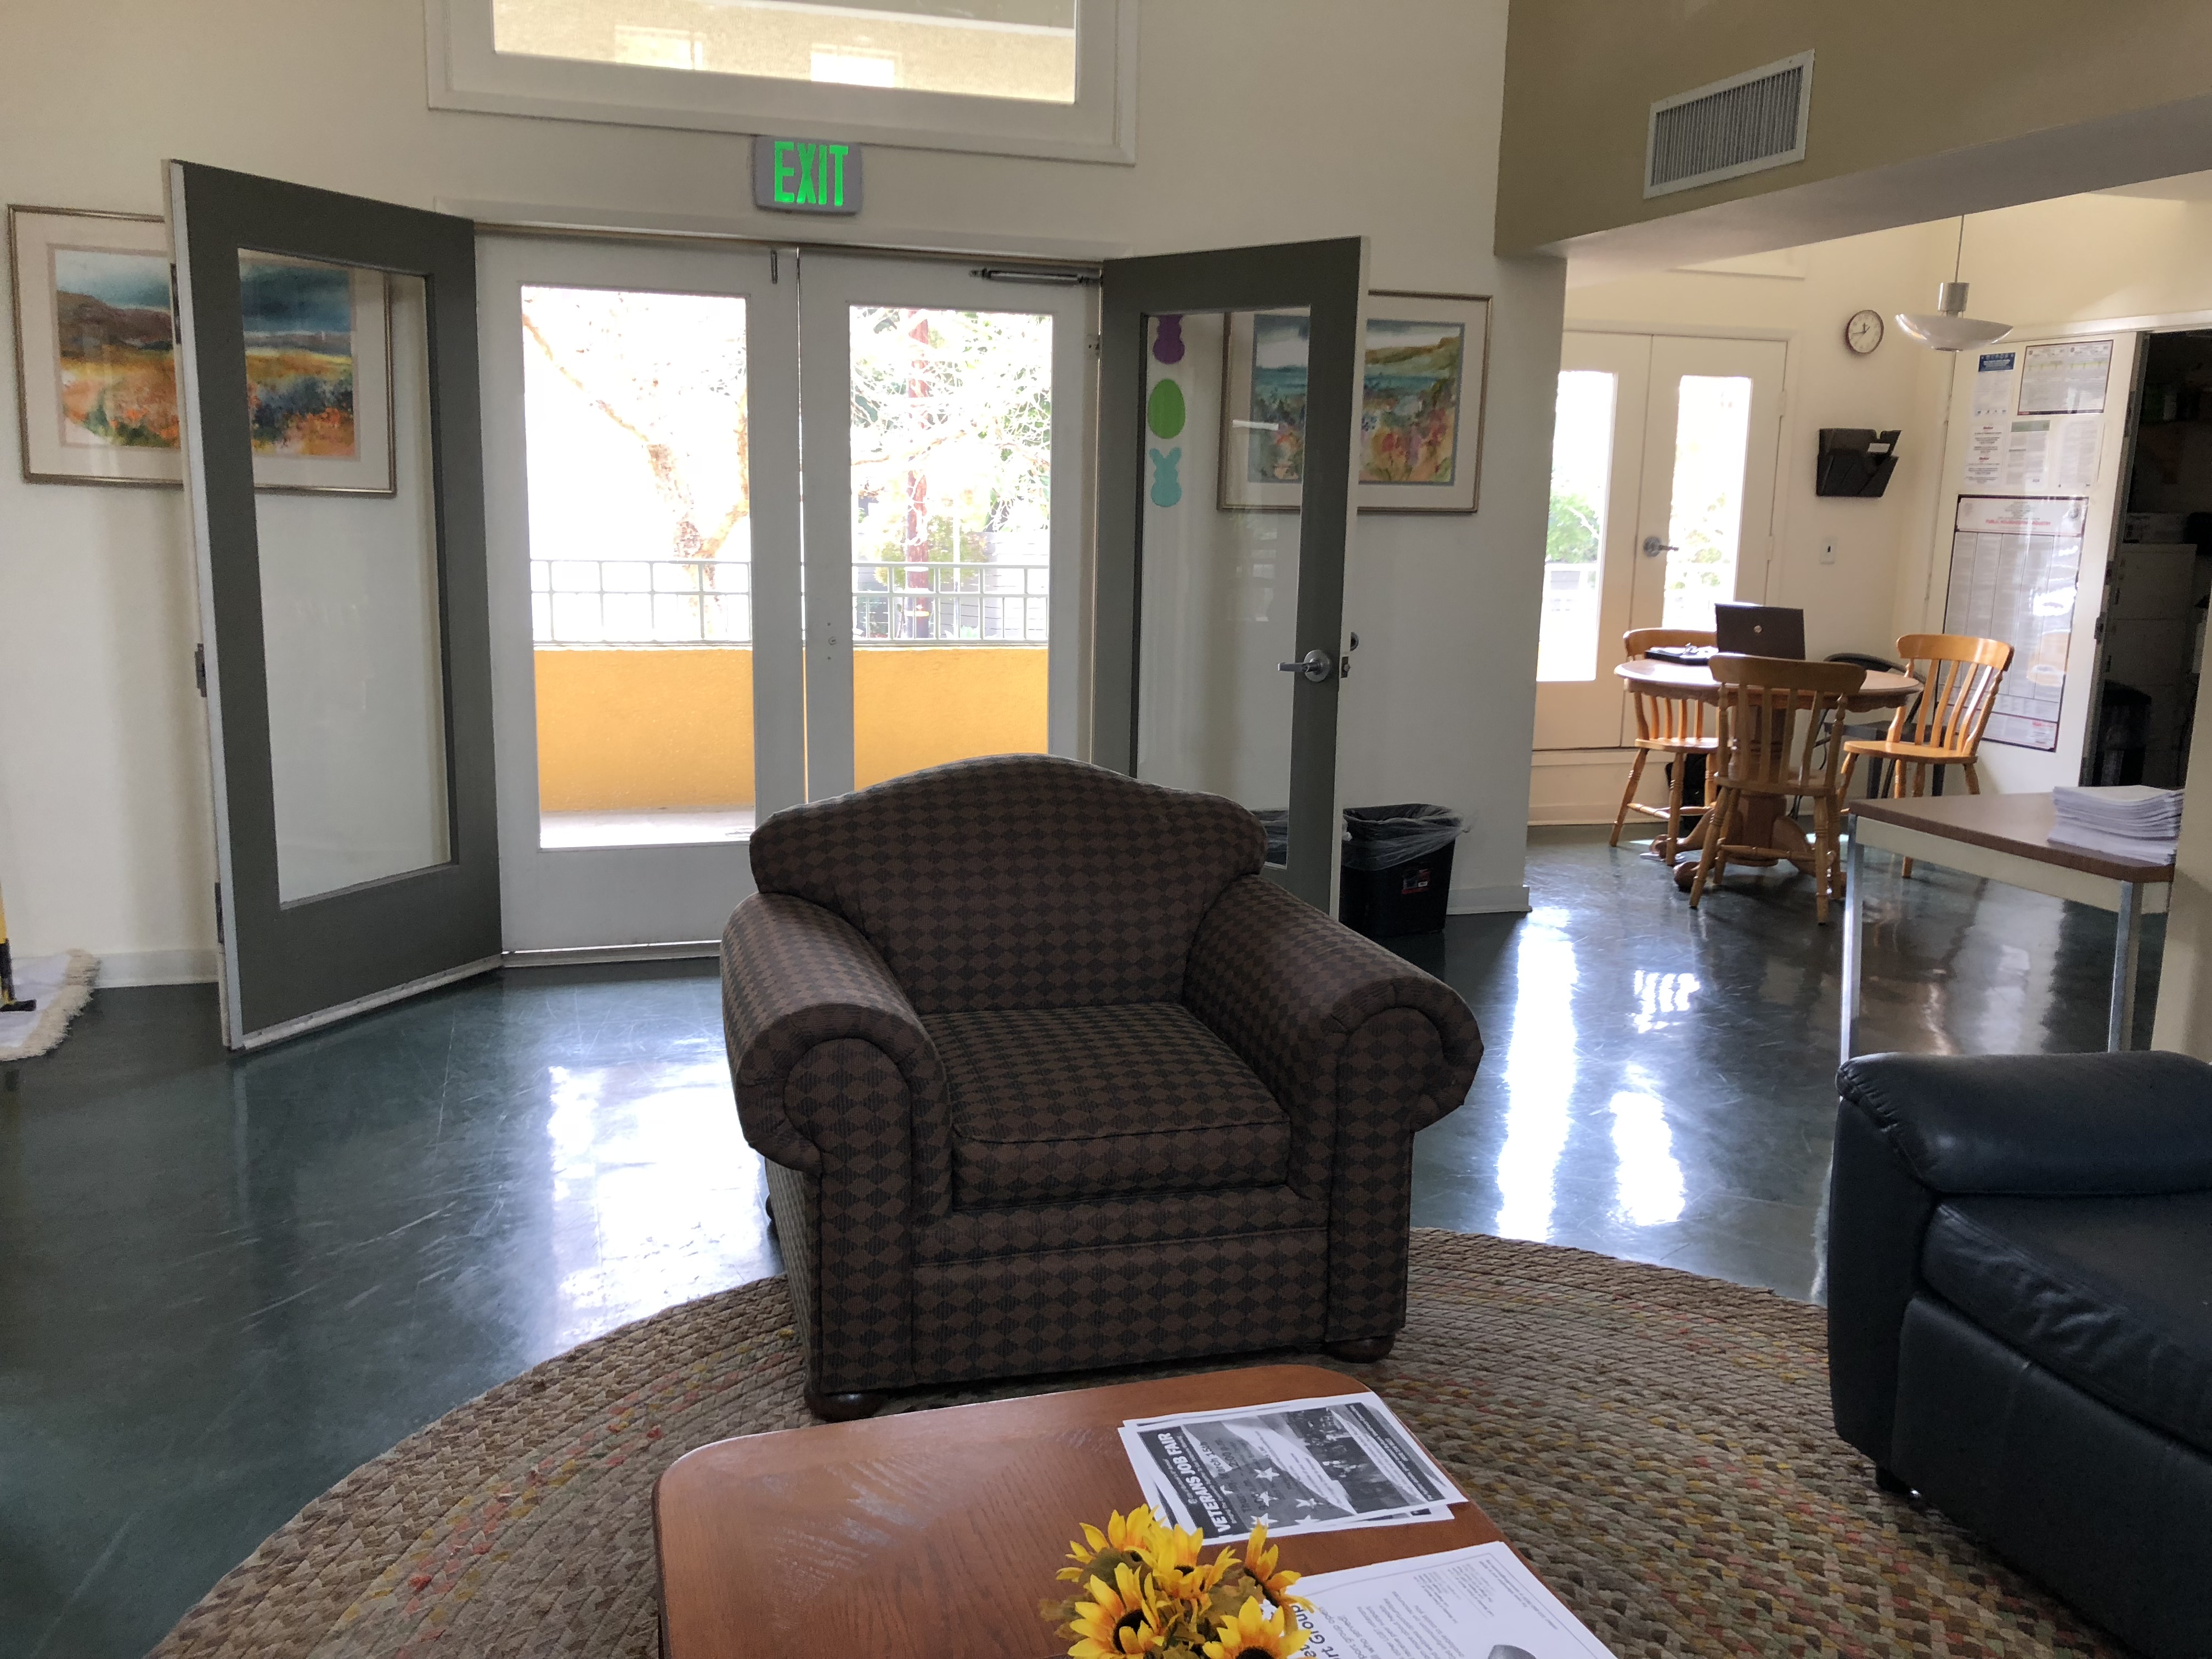 French doors that lead into common room area. Room has 
lots of natural light. Seating area in front of entrance with coffee
table. Another seating area next o large windows with a dining table.